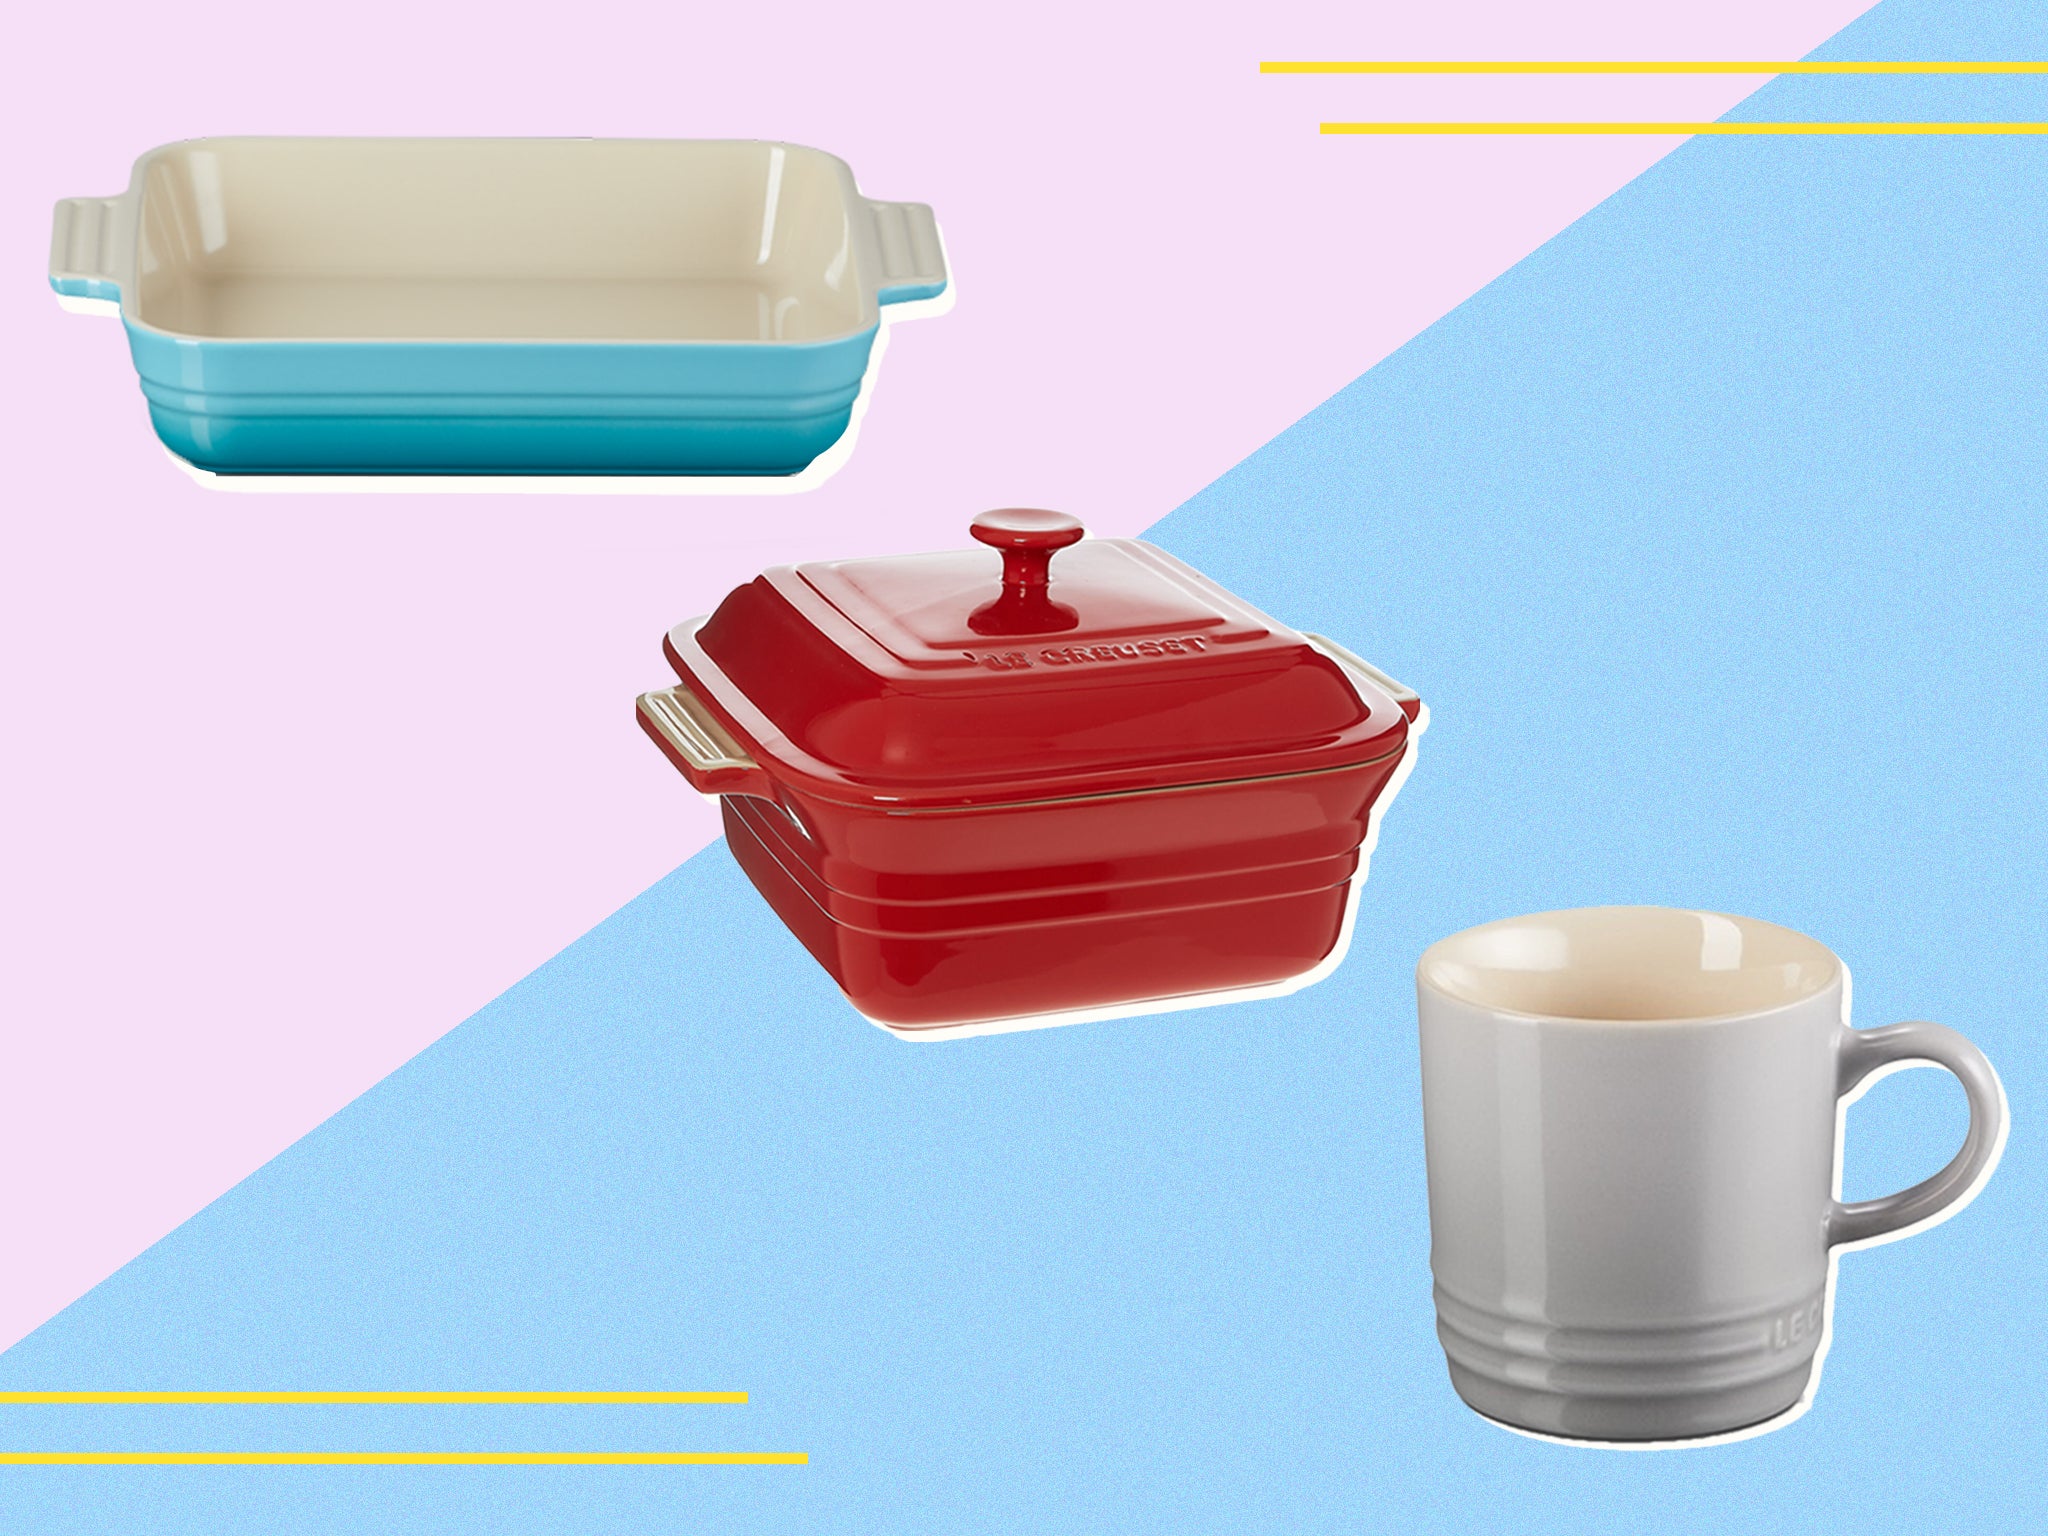 Upgrade your kitchenware now while you can get up to 60 per cent off